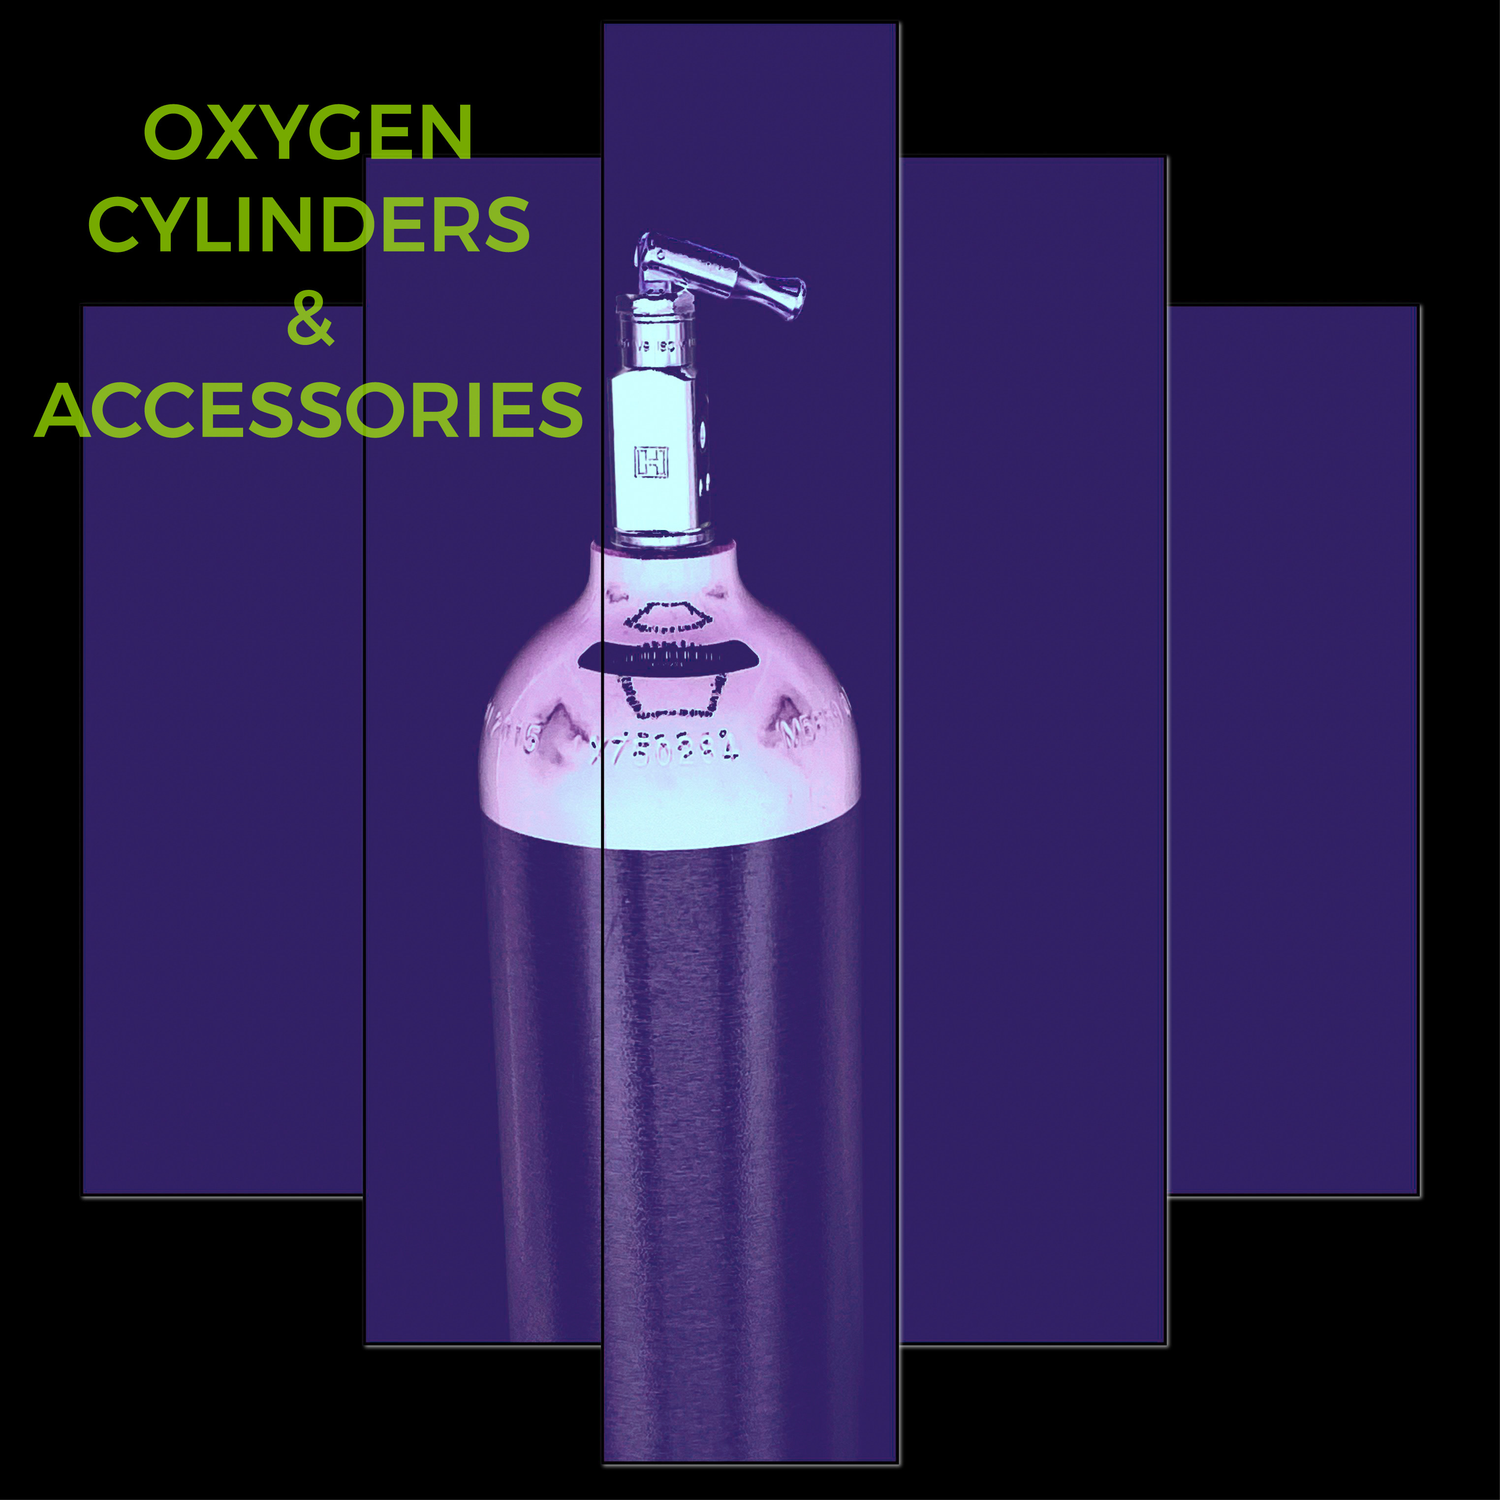 Oxygen Cylinders and Accessories